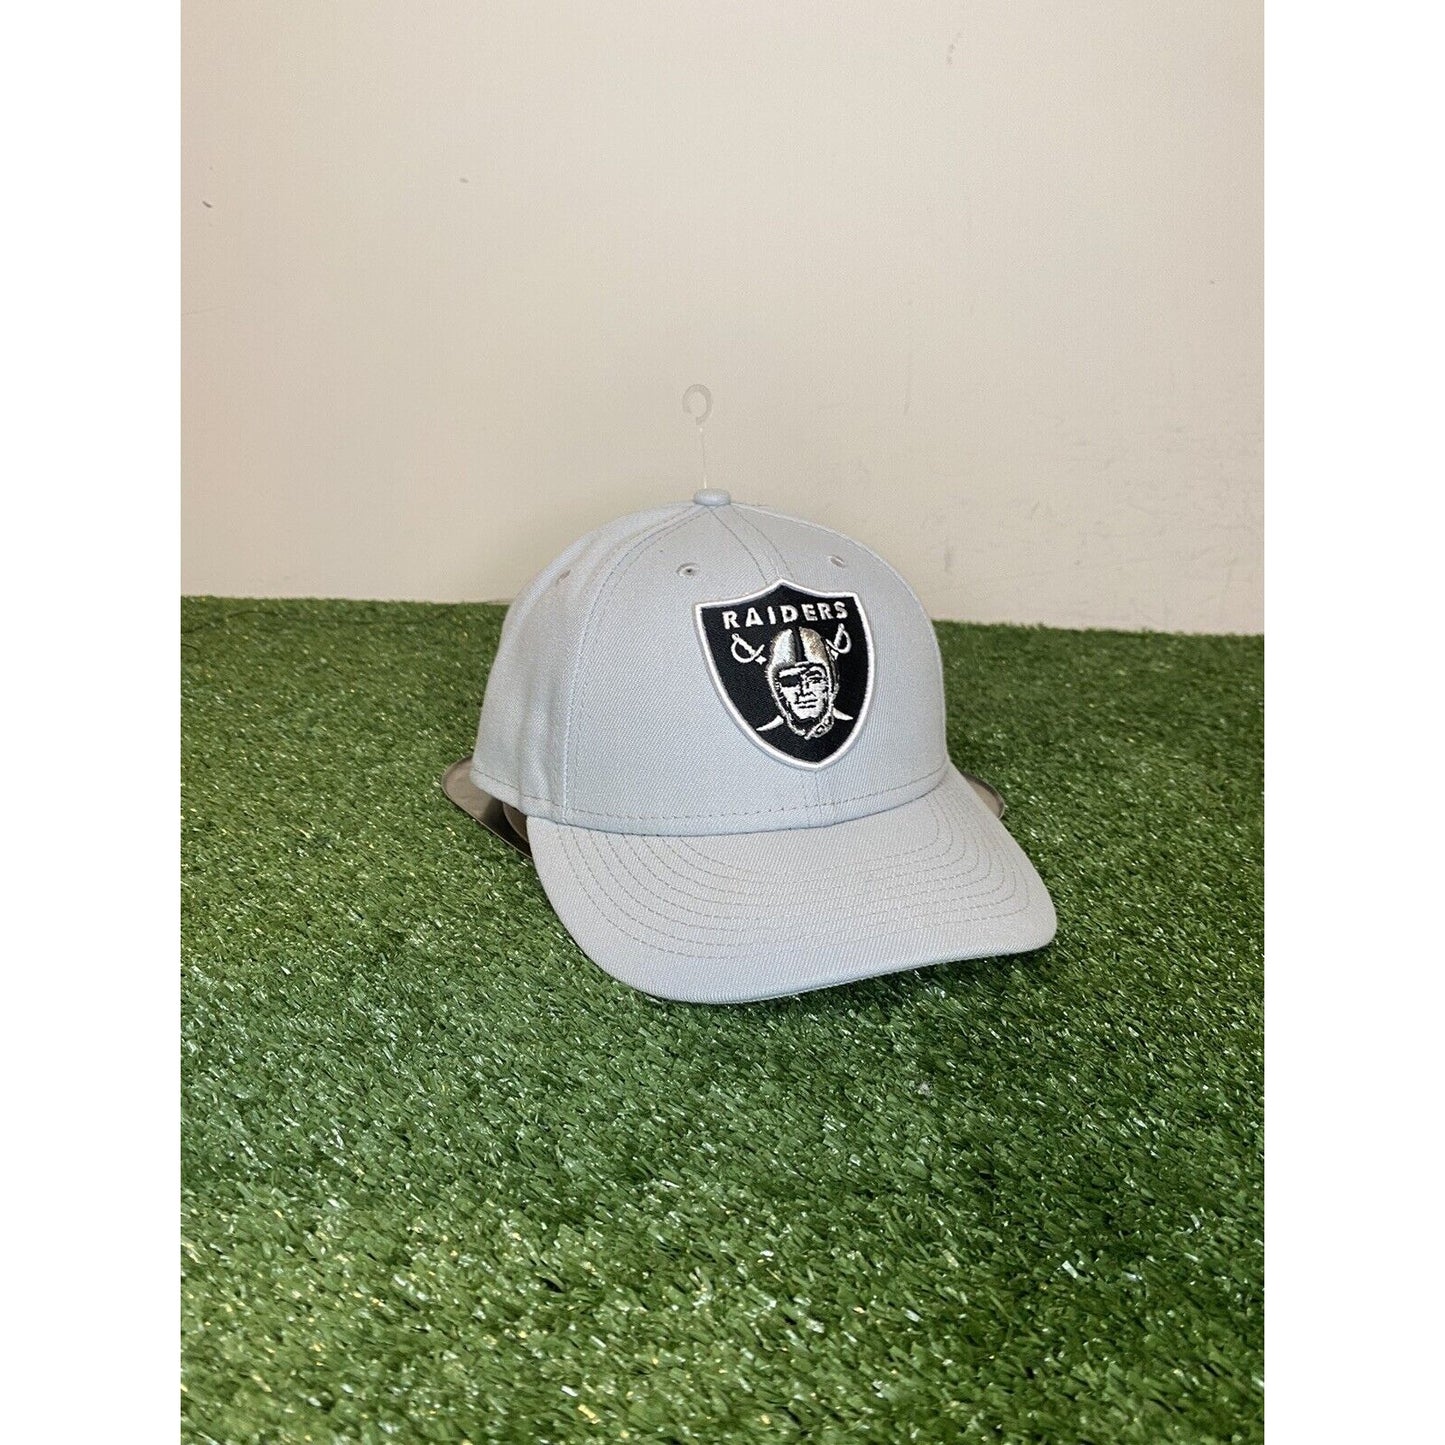 New Era 59Fifty Oakland Raiders logo fitted hat 7 1/2 gray NWOT NFL